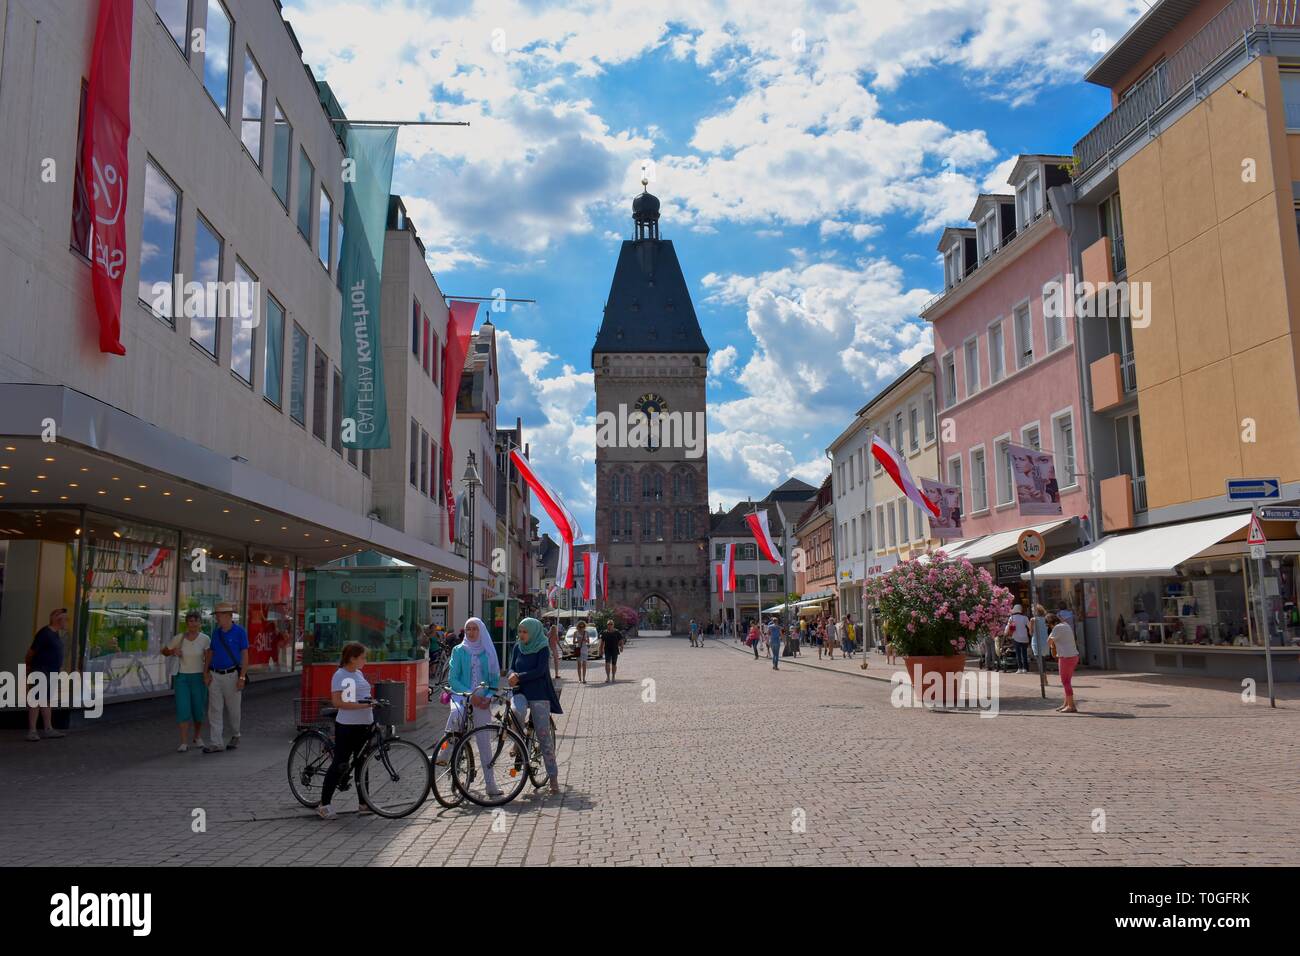 View to the Altpoertel - Old Gate in Speyer, Germany Stock Photo